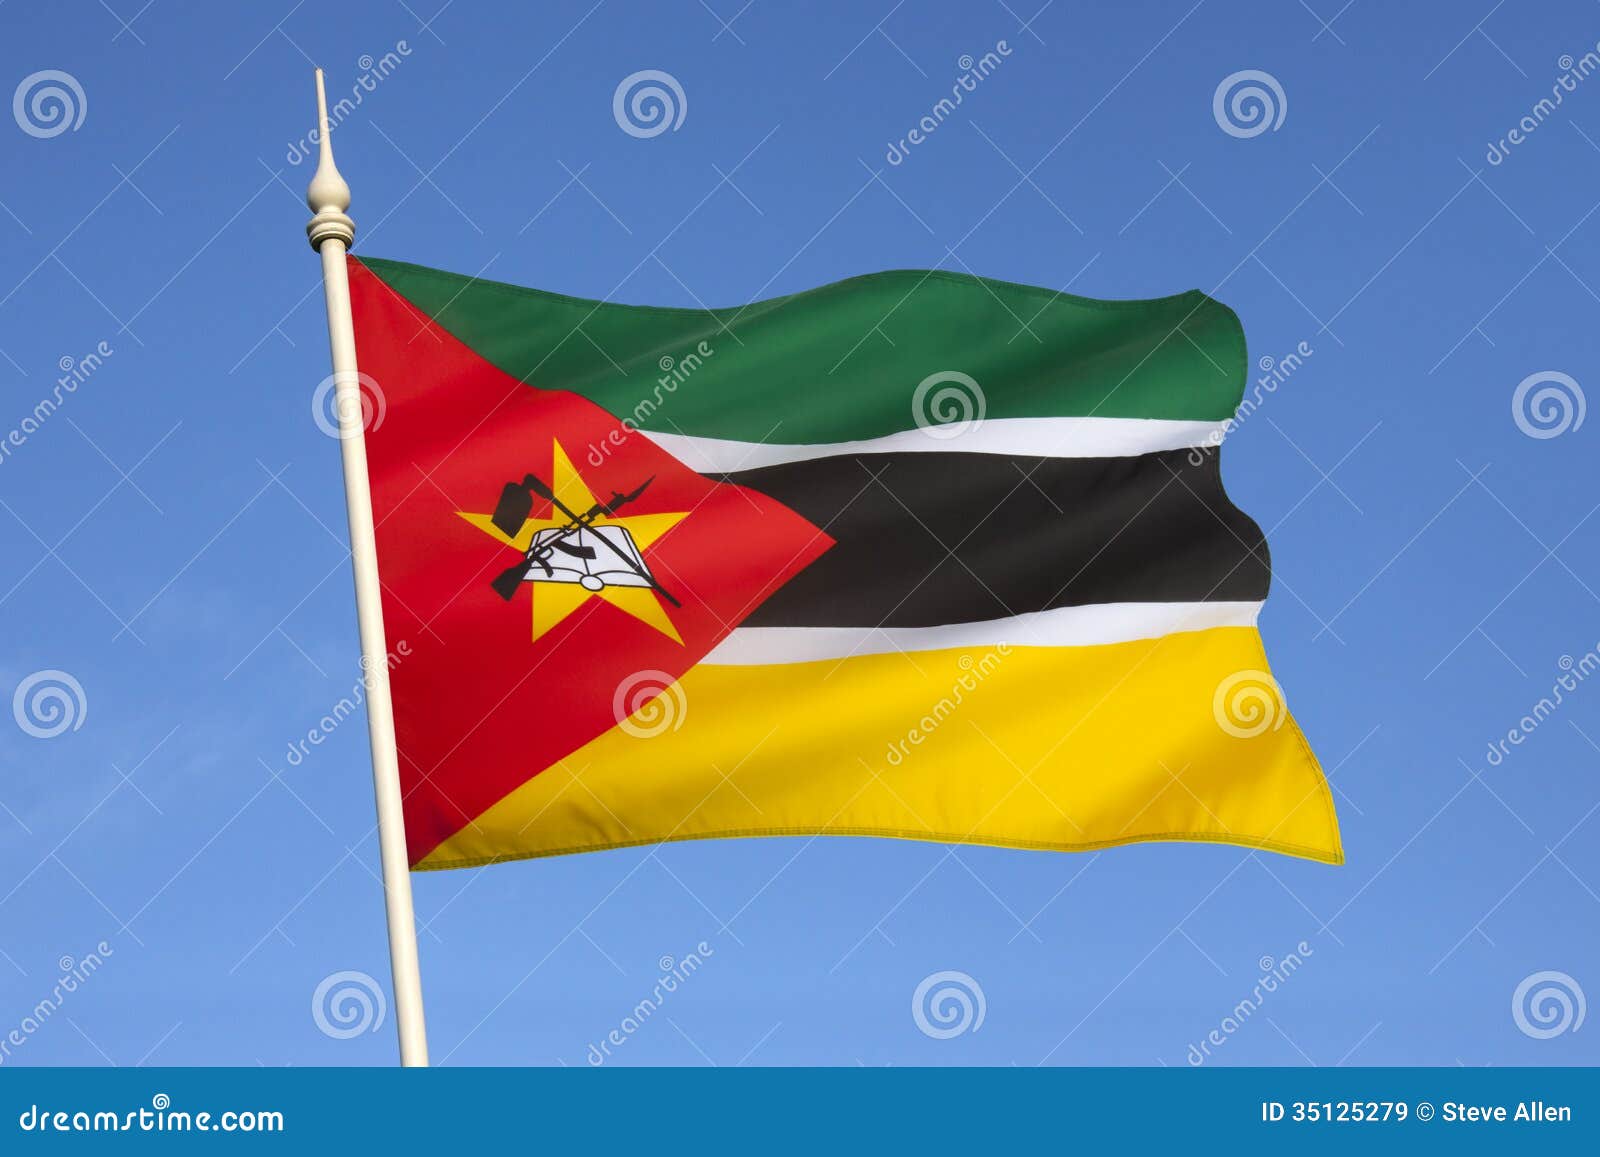 flag of mozambique - africa